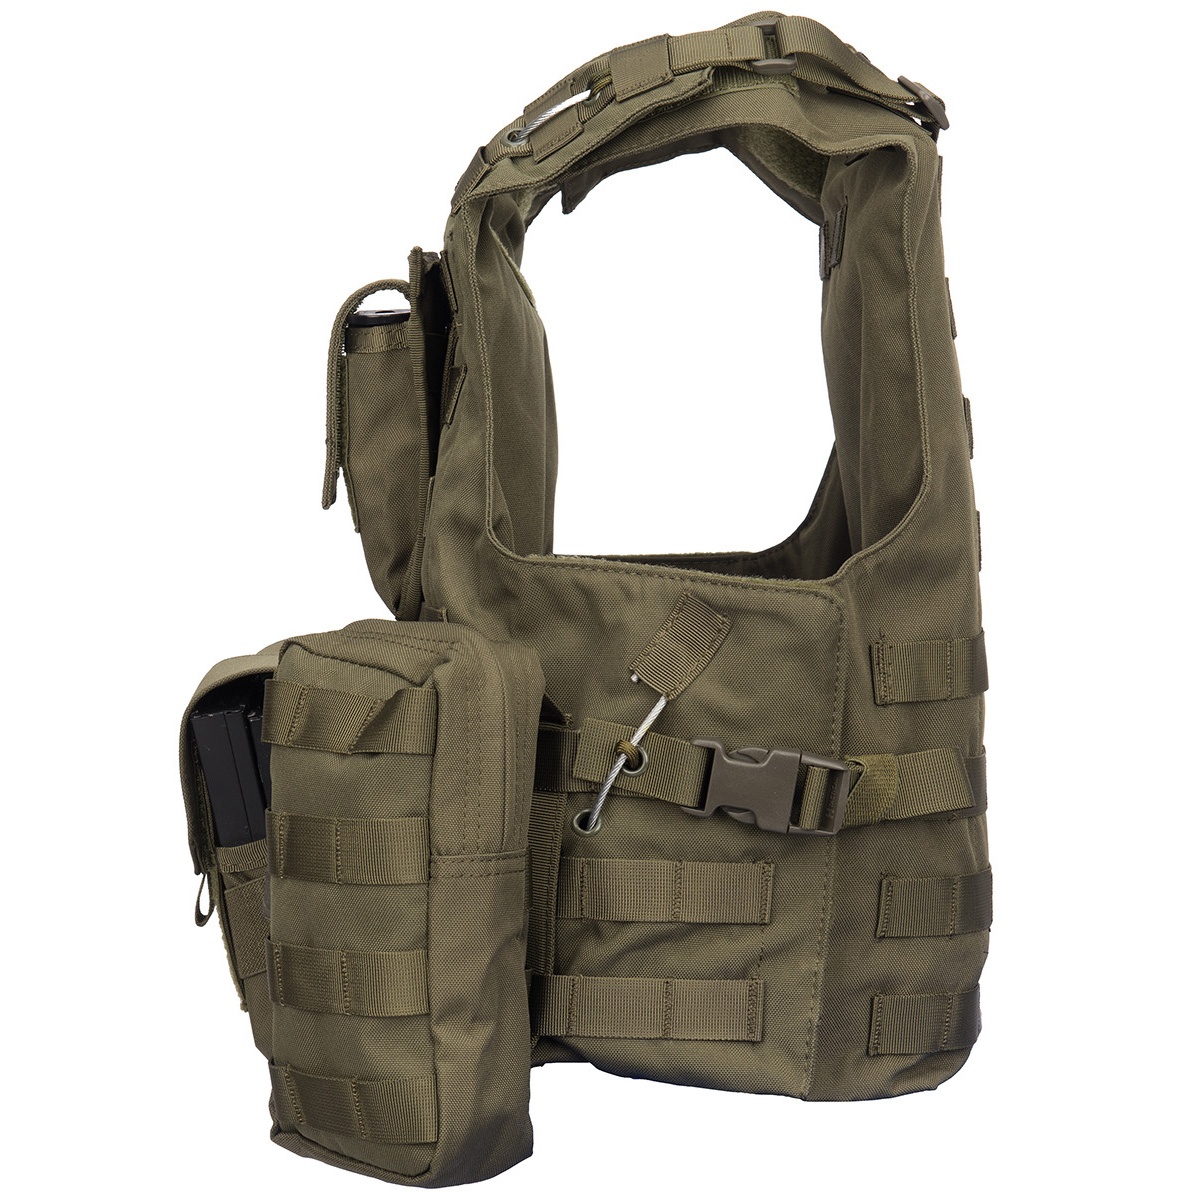 New Airsoft Molle Triple Armor Magazine Pouch 6 Colors With Hook&Loop Closures 